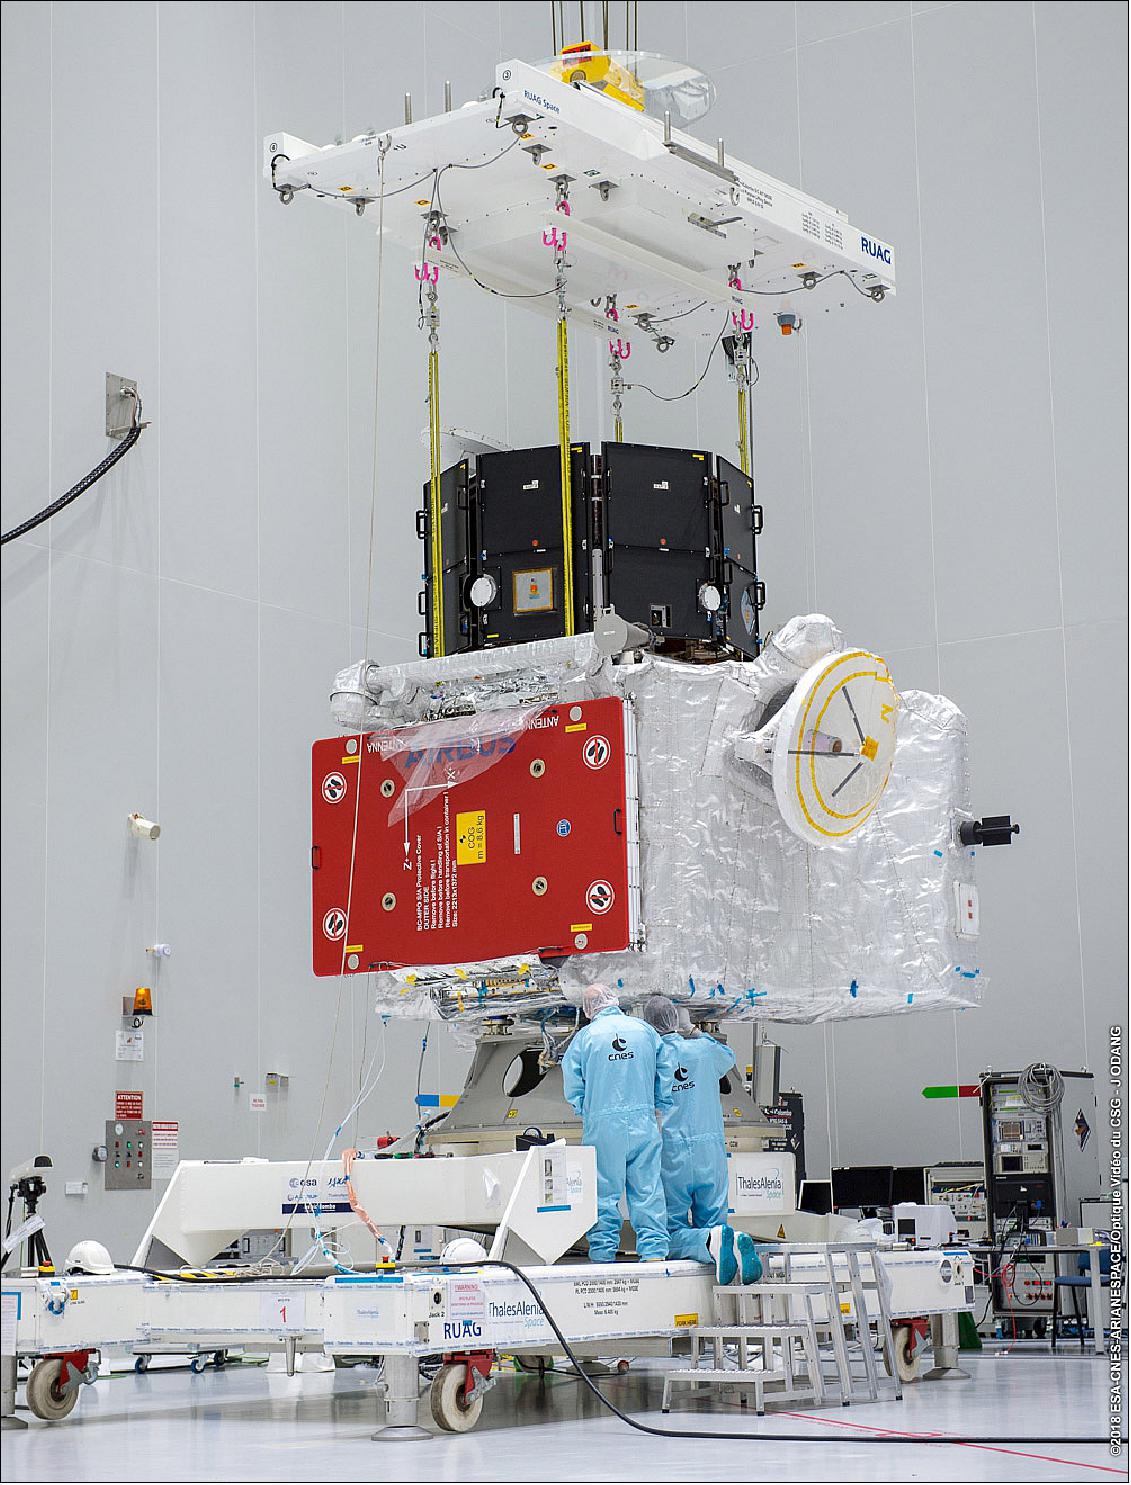 Figure 129: MMO and MPO mini-stack: ESA's MPO (bottom) and JAXA's MMO (top) are being arranged in their launch configuration at Europe’s Spaceport in Kourou (image credit: ESA/CNES/Arianespace/Optique video du CSG – J. Odang)